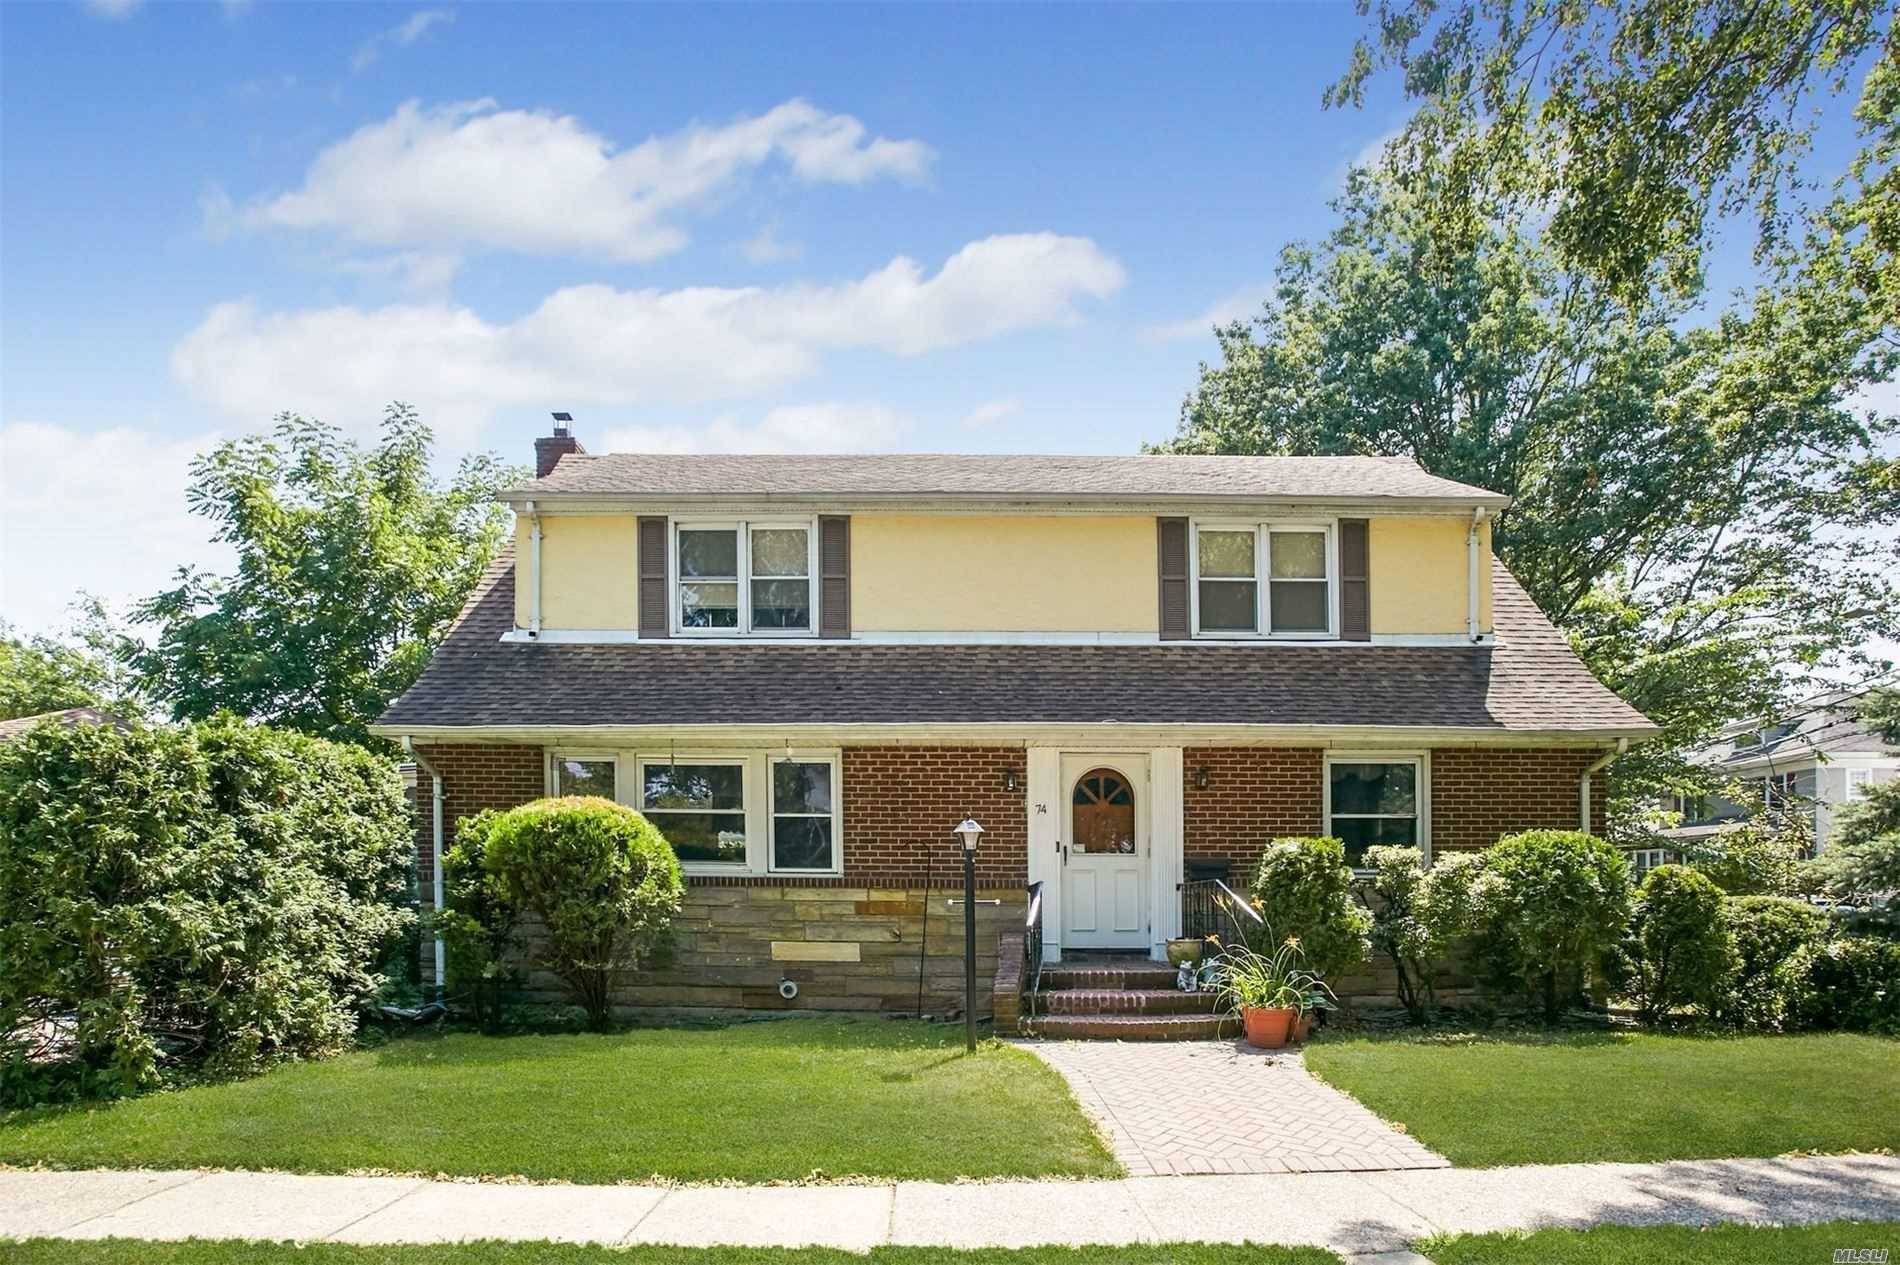 Immaculate Two Family, Brick Cape In The Heart Of The Village Of Floral Park.